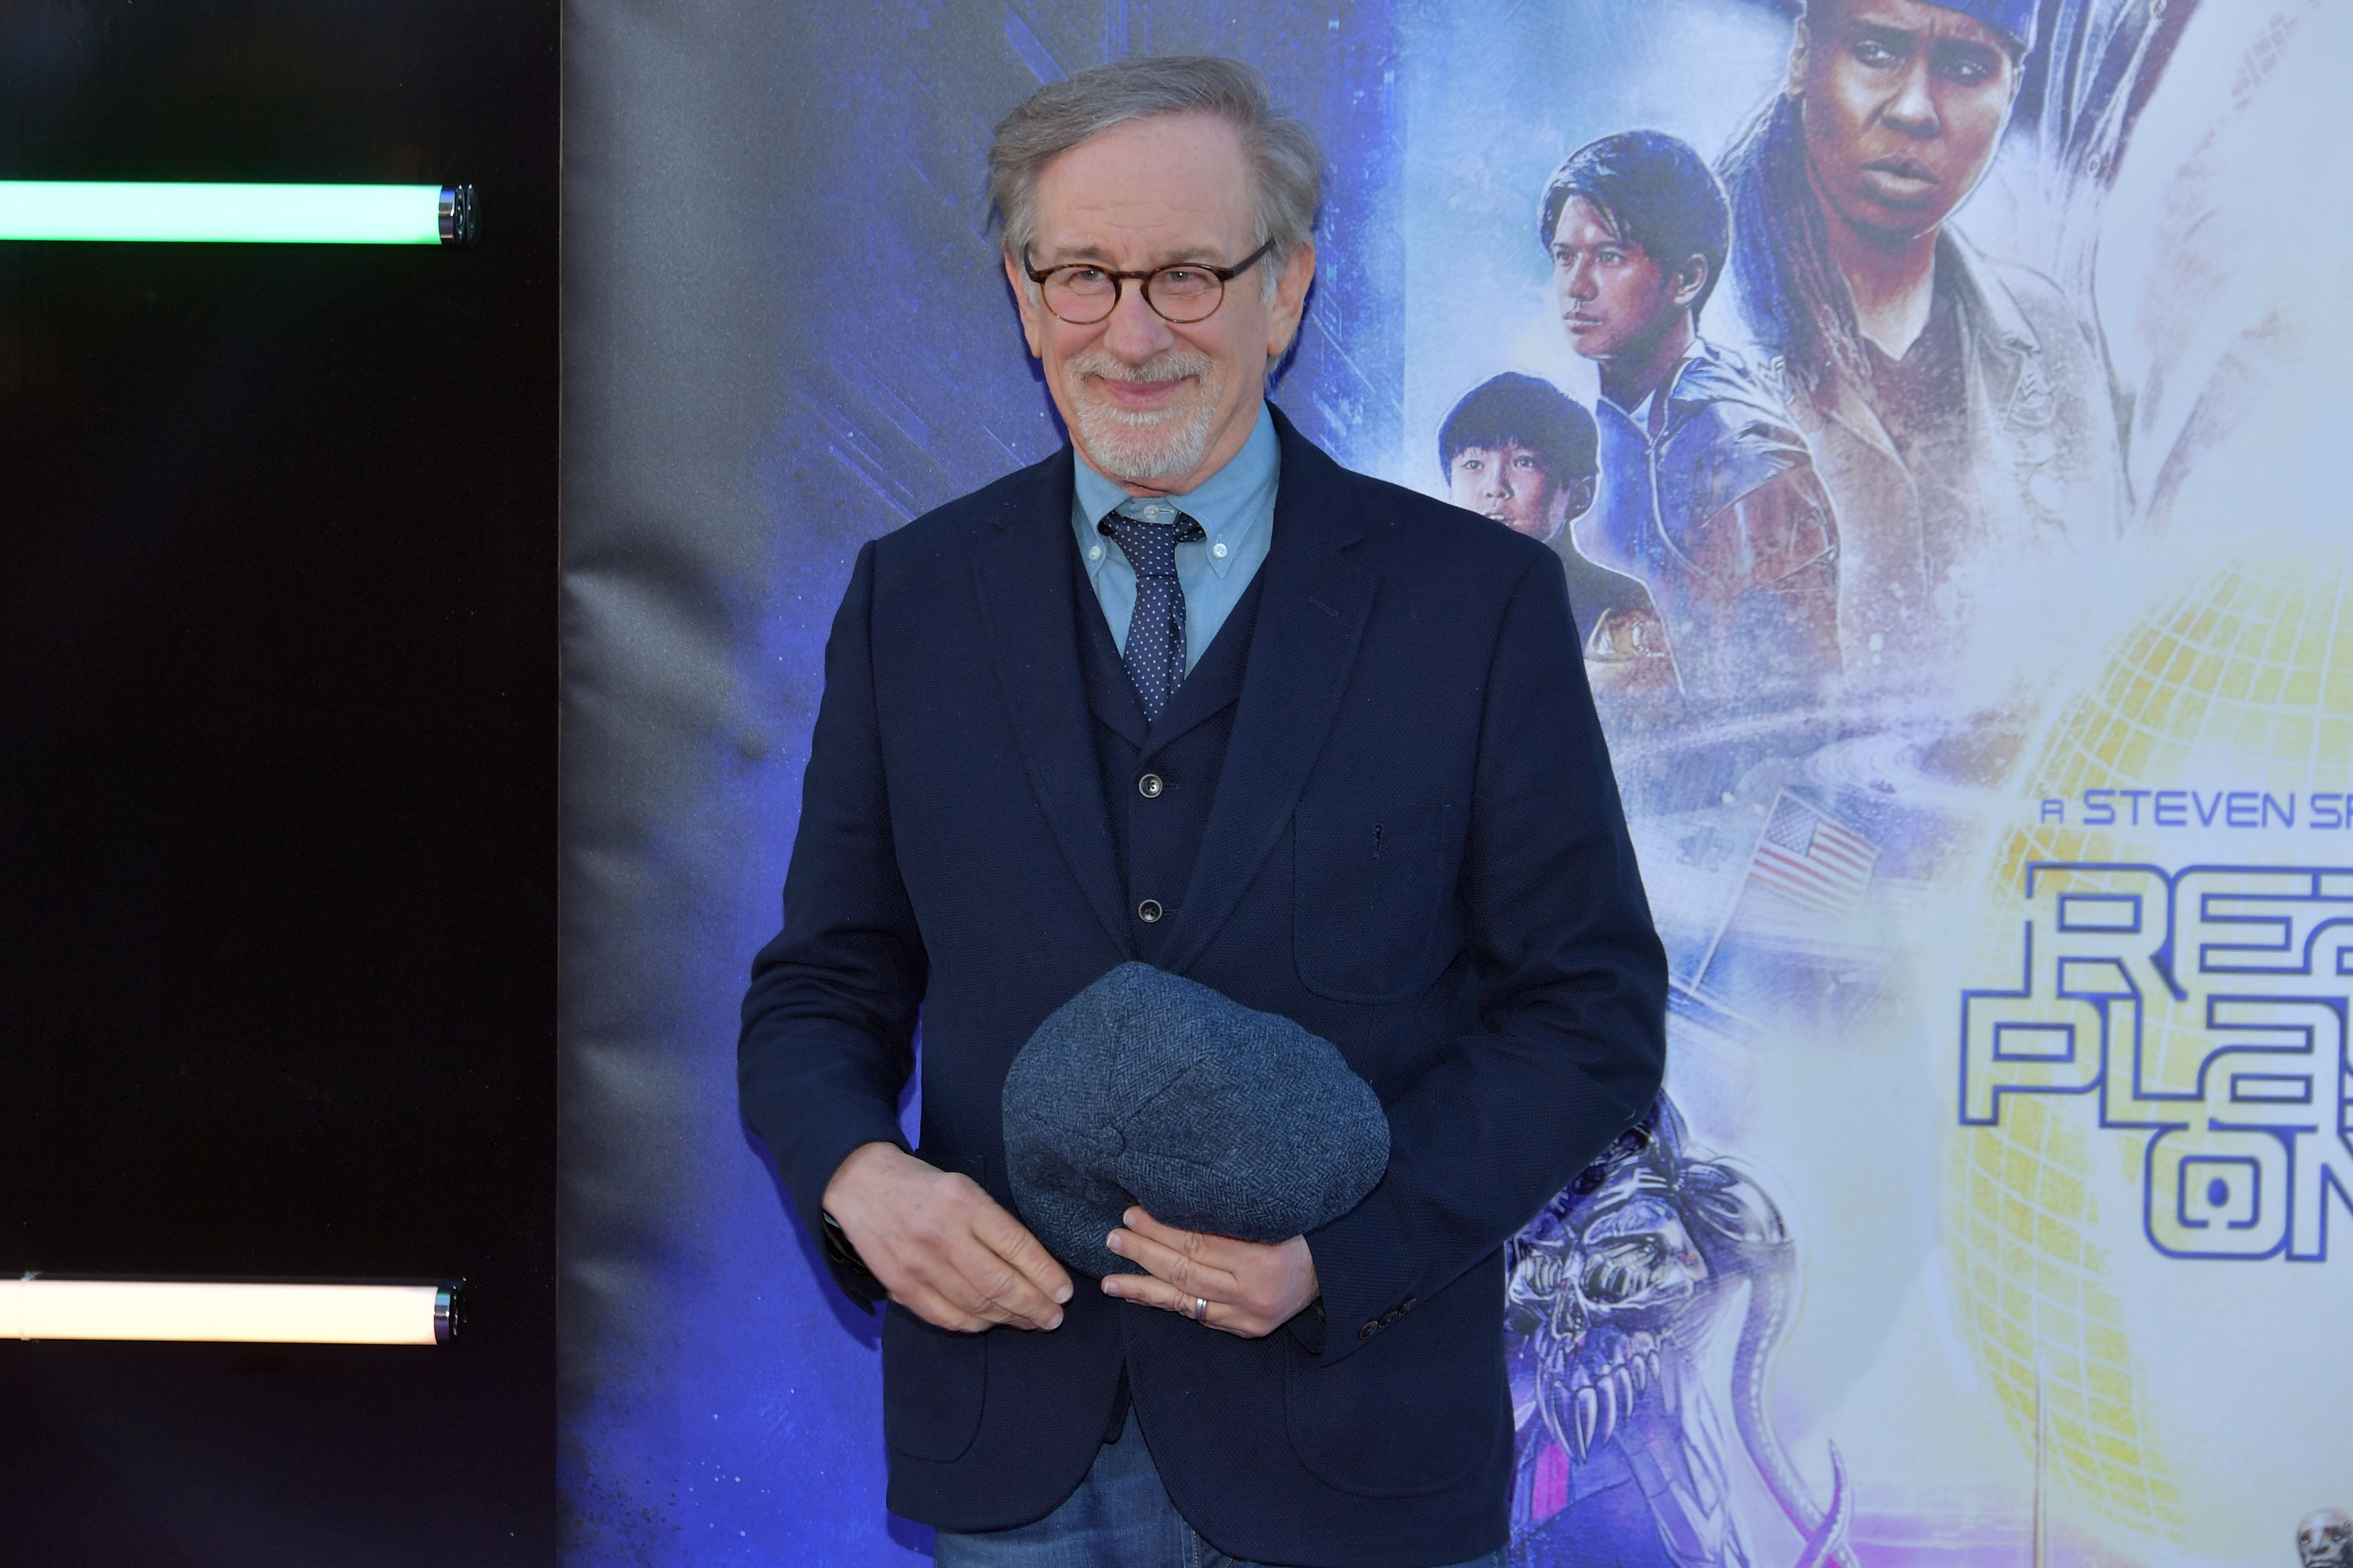 Steven Spielberg at the premiere of "Ready Player One" at Dolby Theatre on March 26, 2018 | Photo: Getty Images